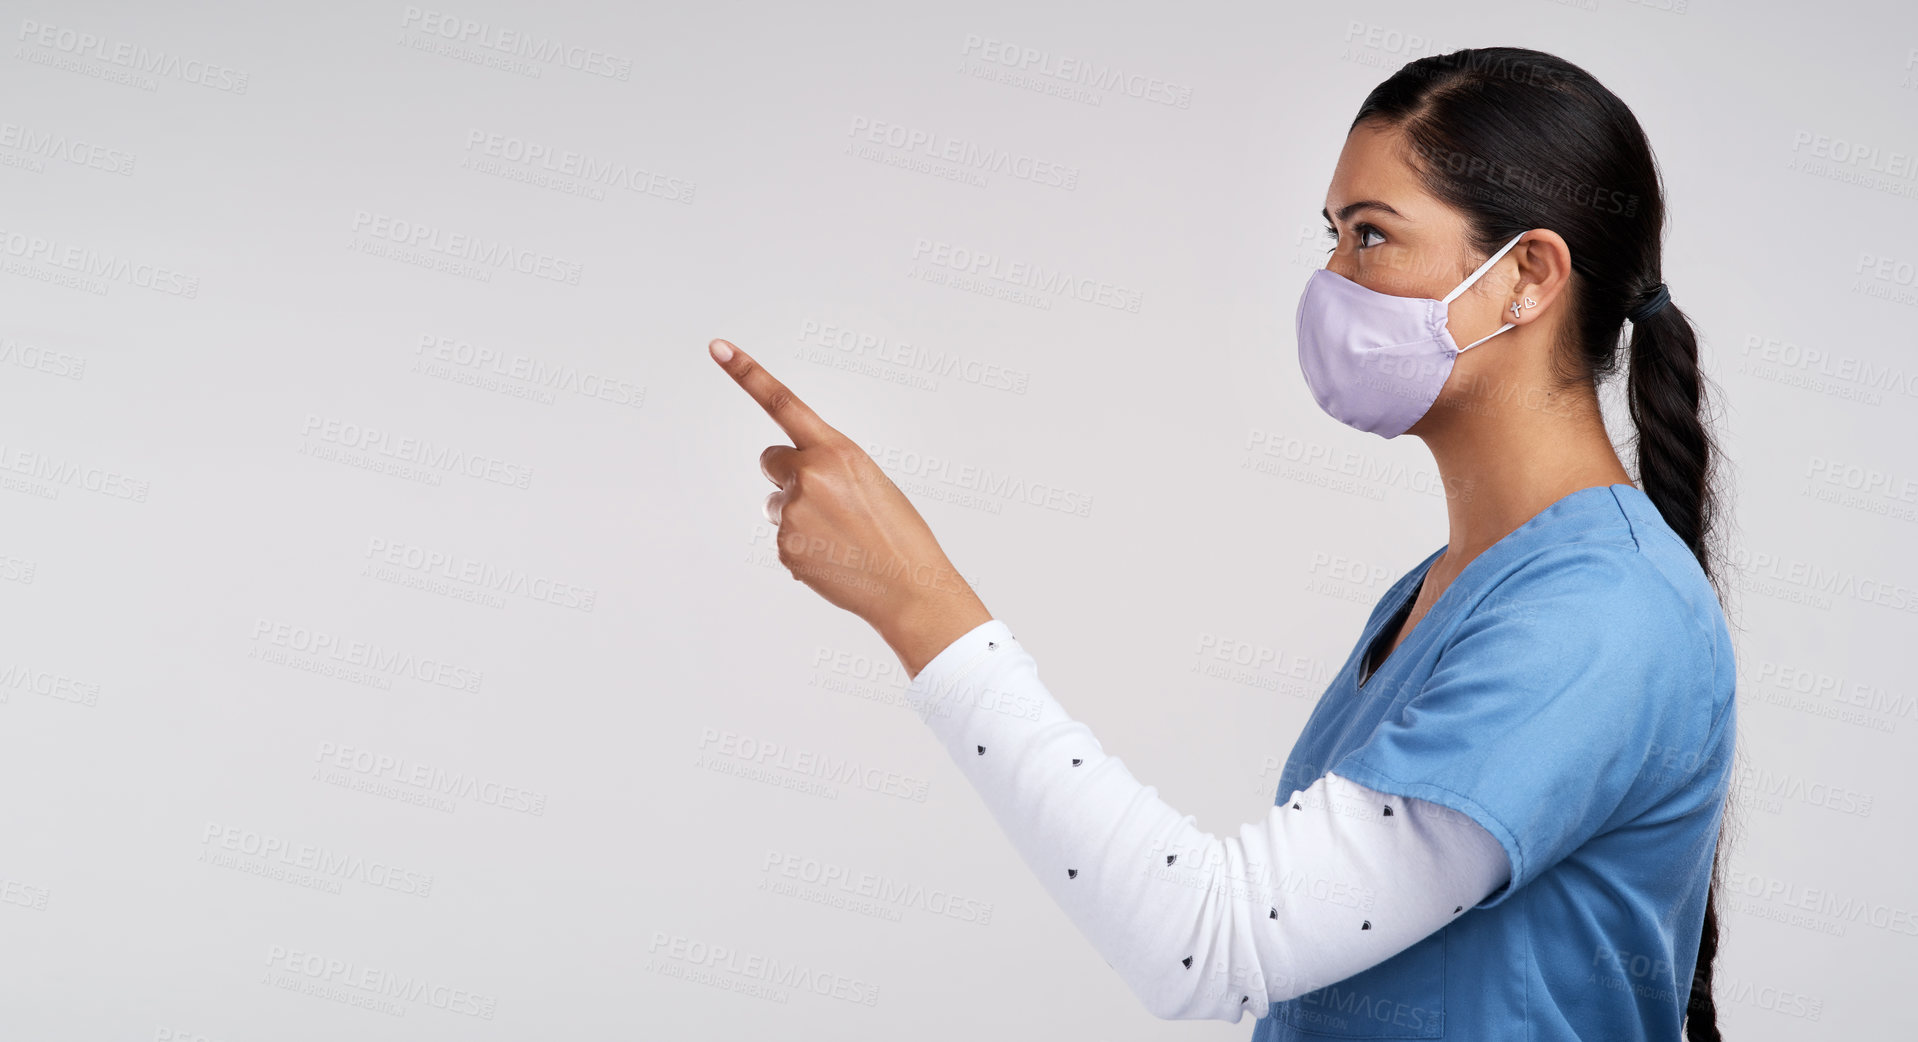 Buy stock photo Side shot of a young doctor wearing a surgical face mask and pointing to her right against a white background